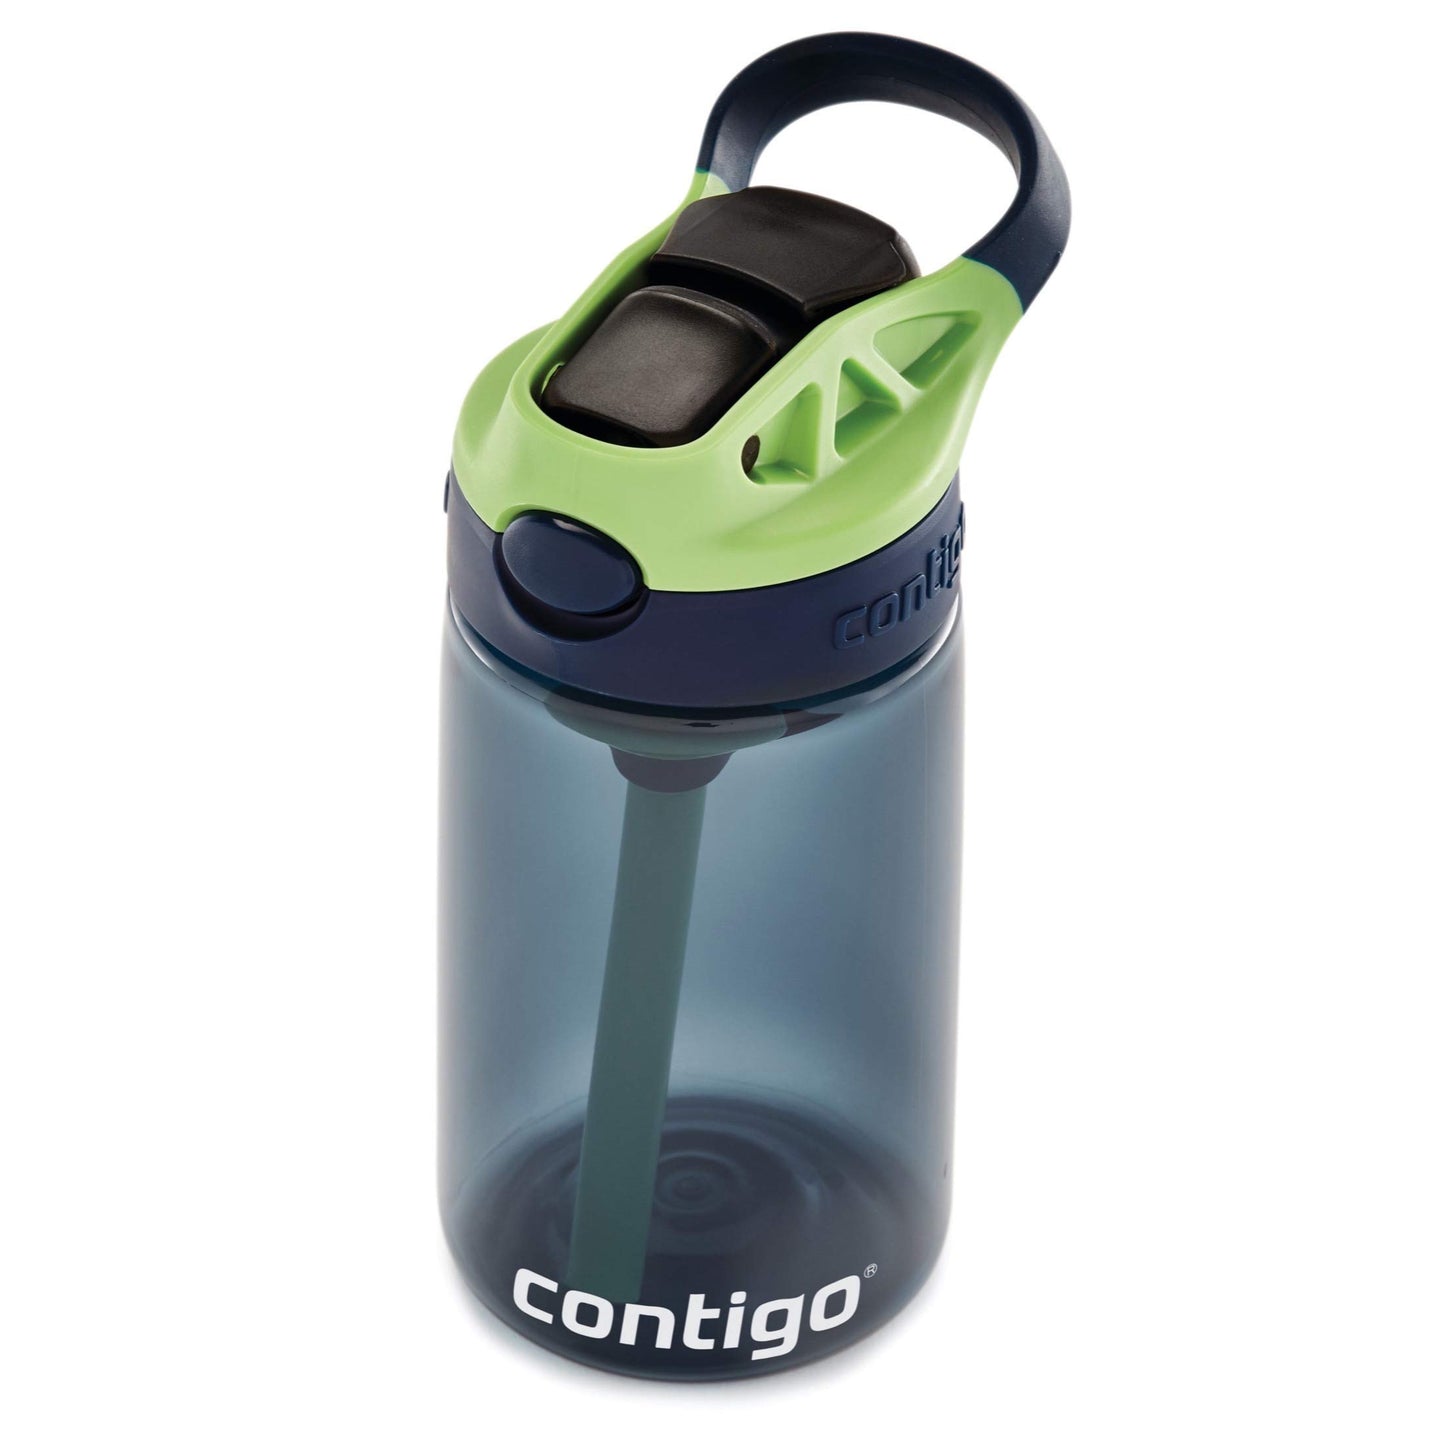 Contigo Aubrey Kids Cleanable Water Bottle with Silicone Straw and Spill-Proof Lid, Dishwasher Safe, 14oz 2-Pack, Blueberry & Cosmos